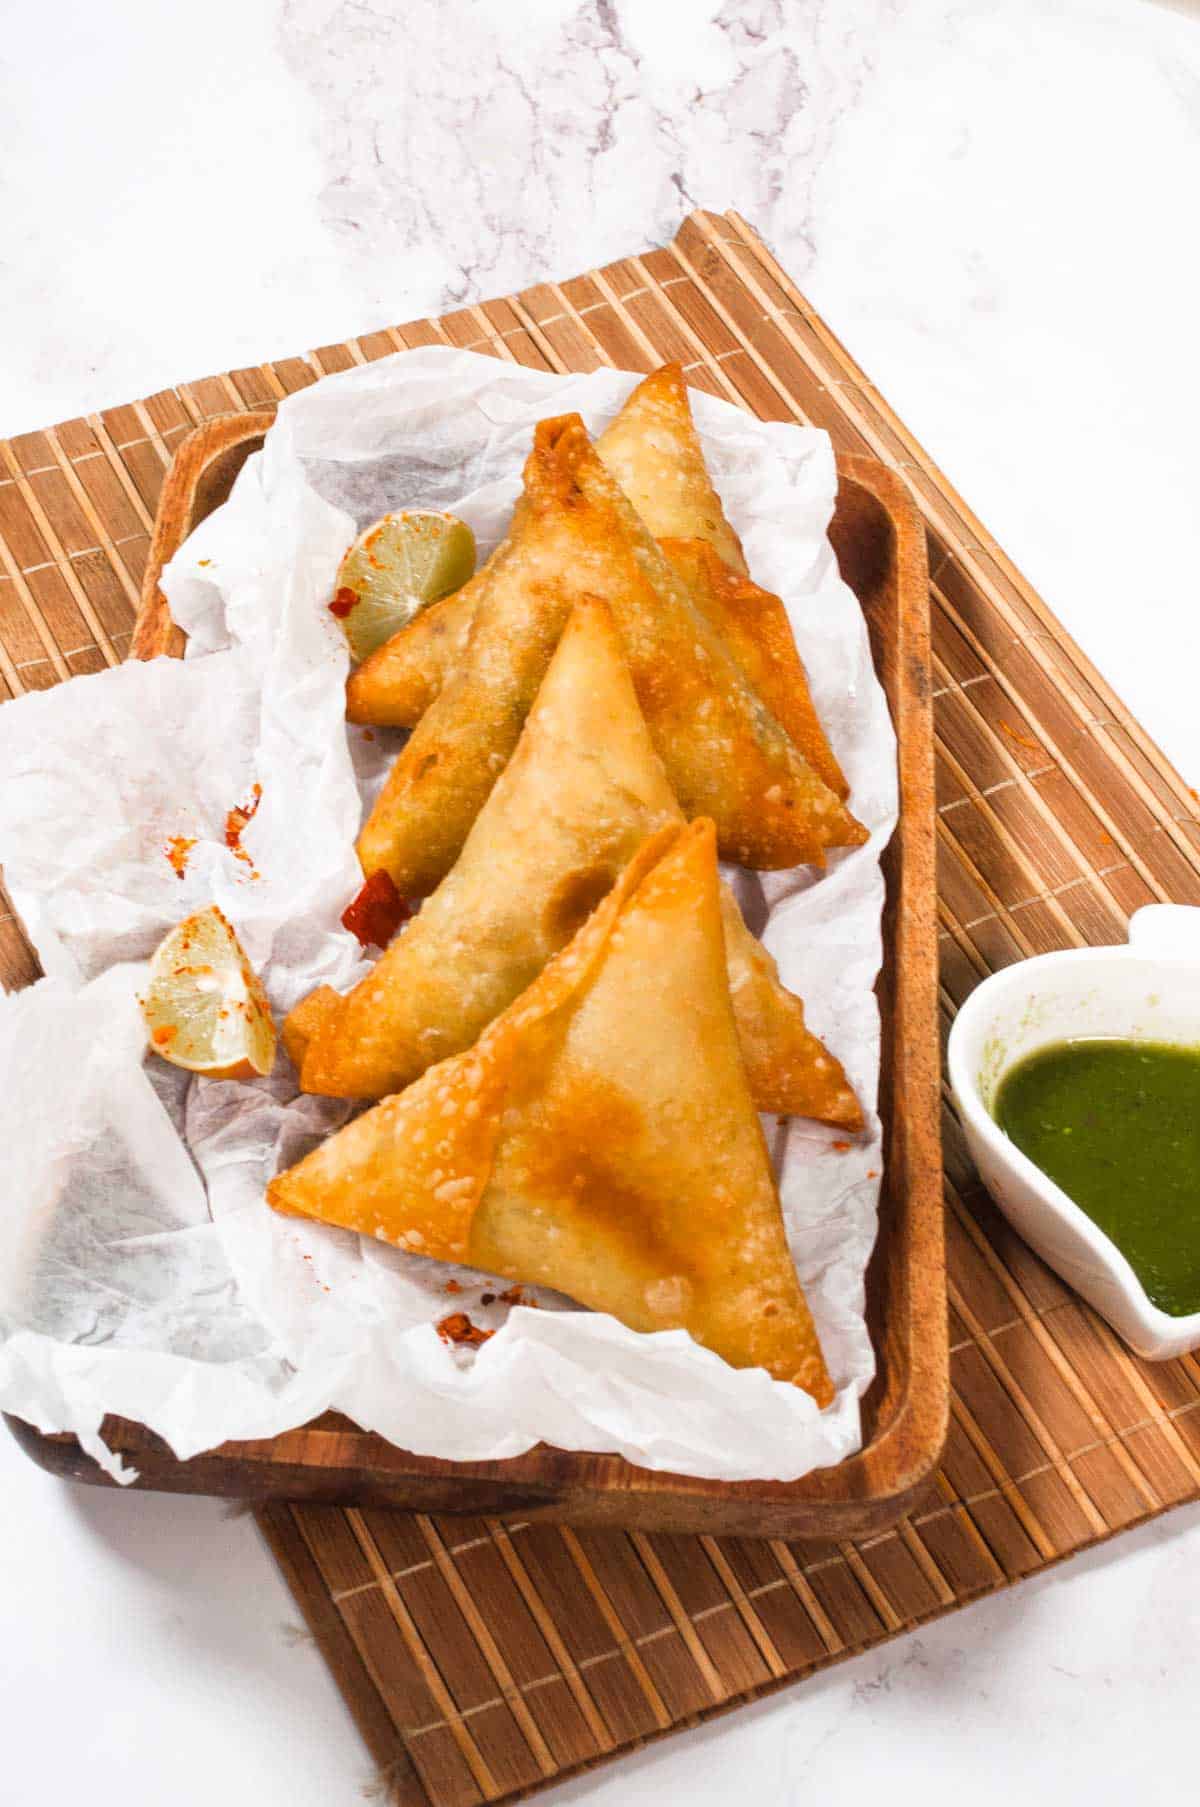 Four chicken samosa fried and lined up in a tray.